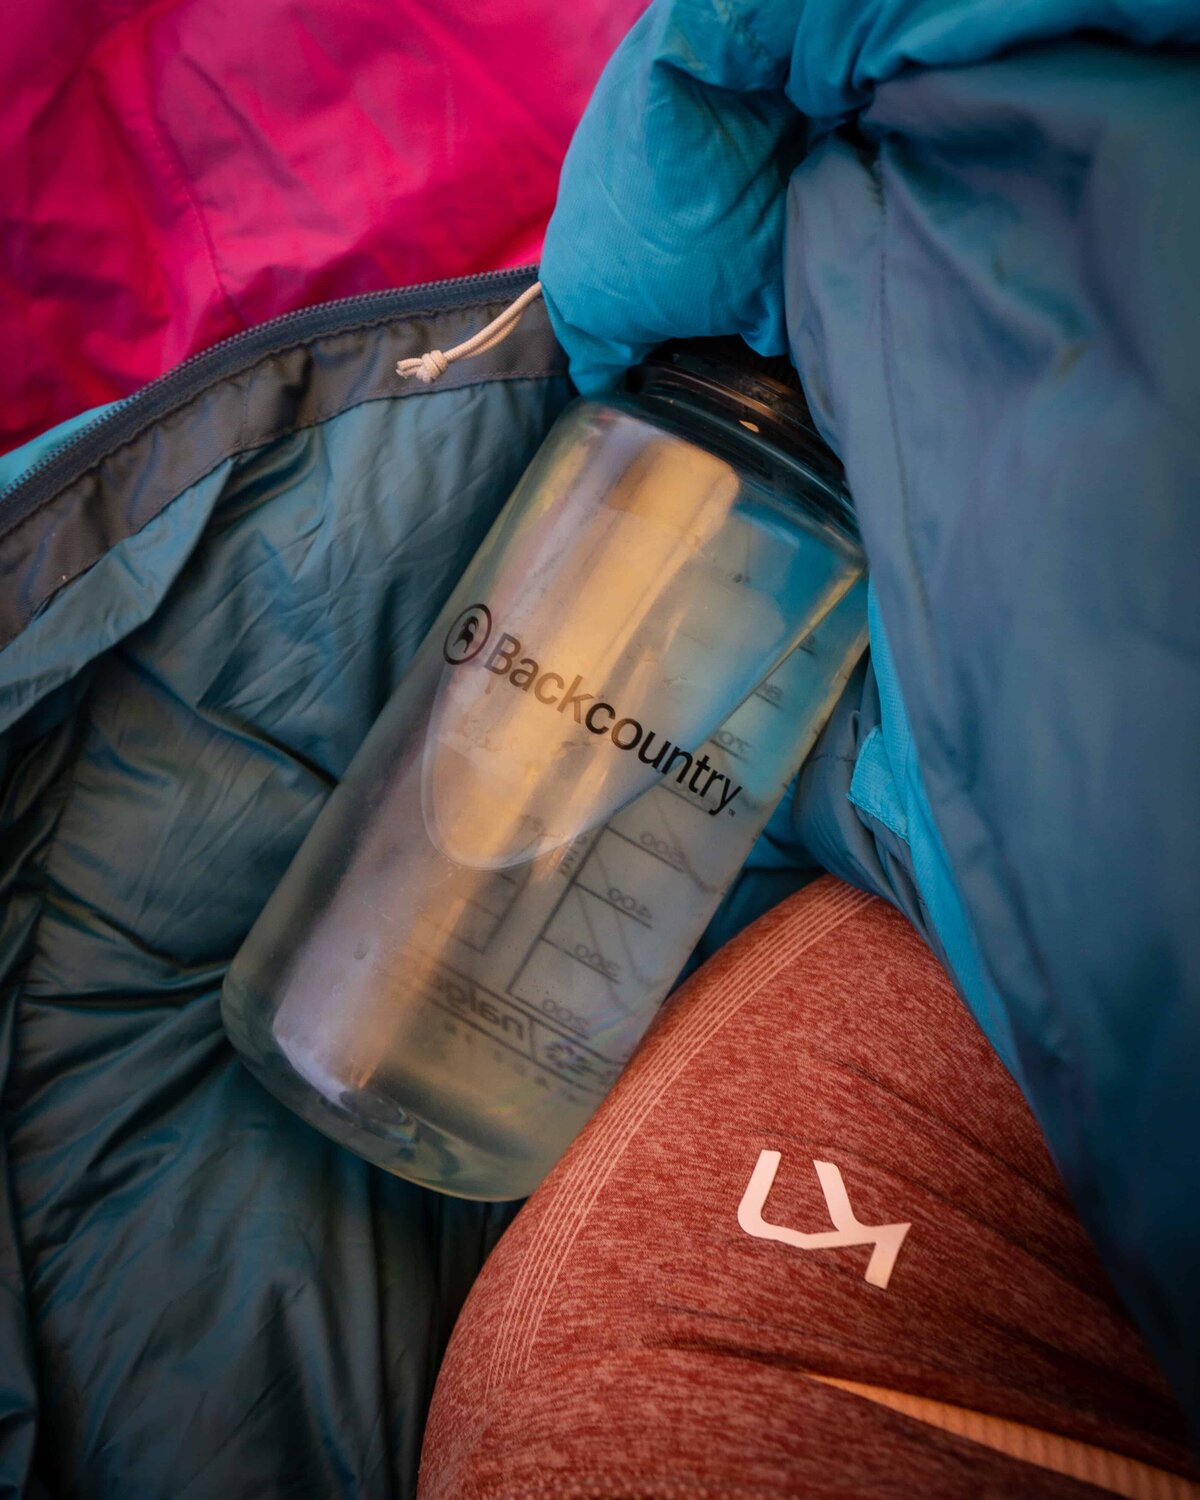 Clear Backcountry water bottle inside a dark colored backpack